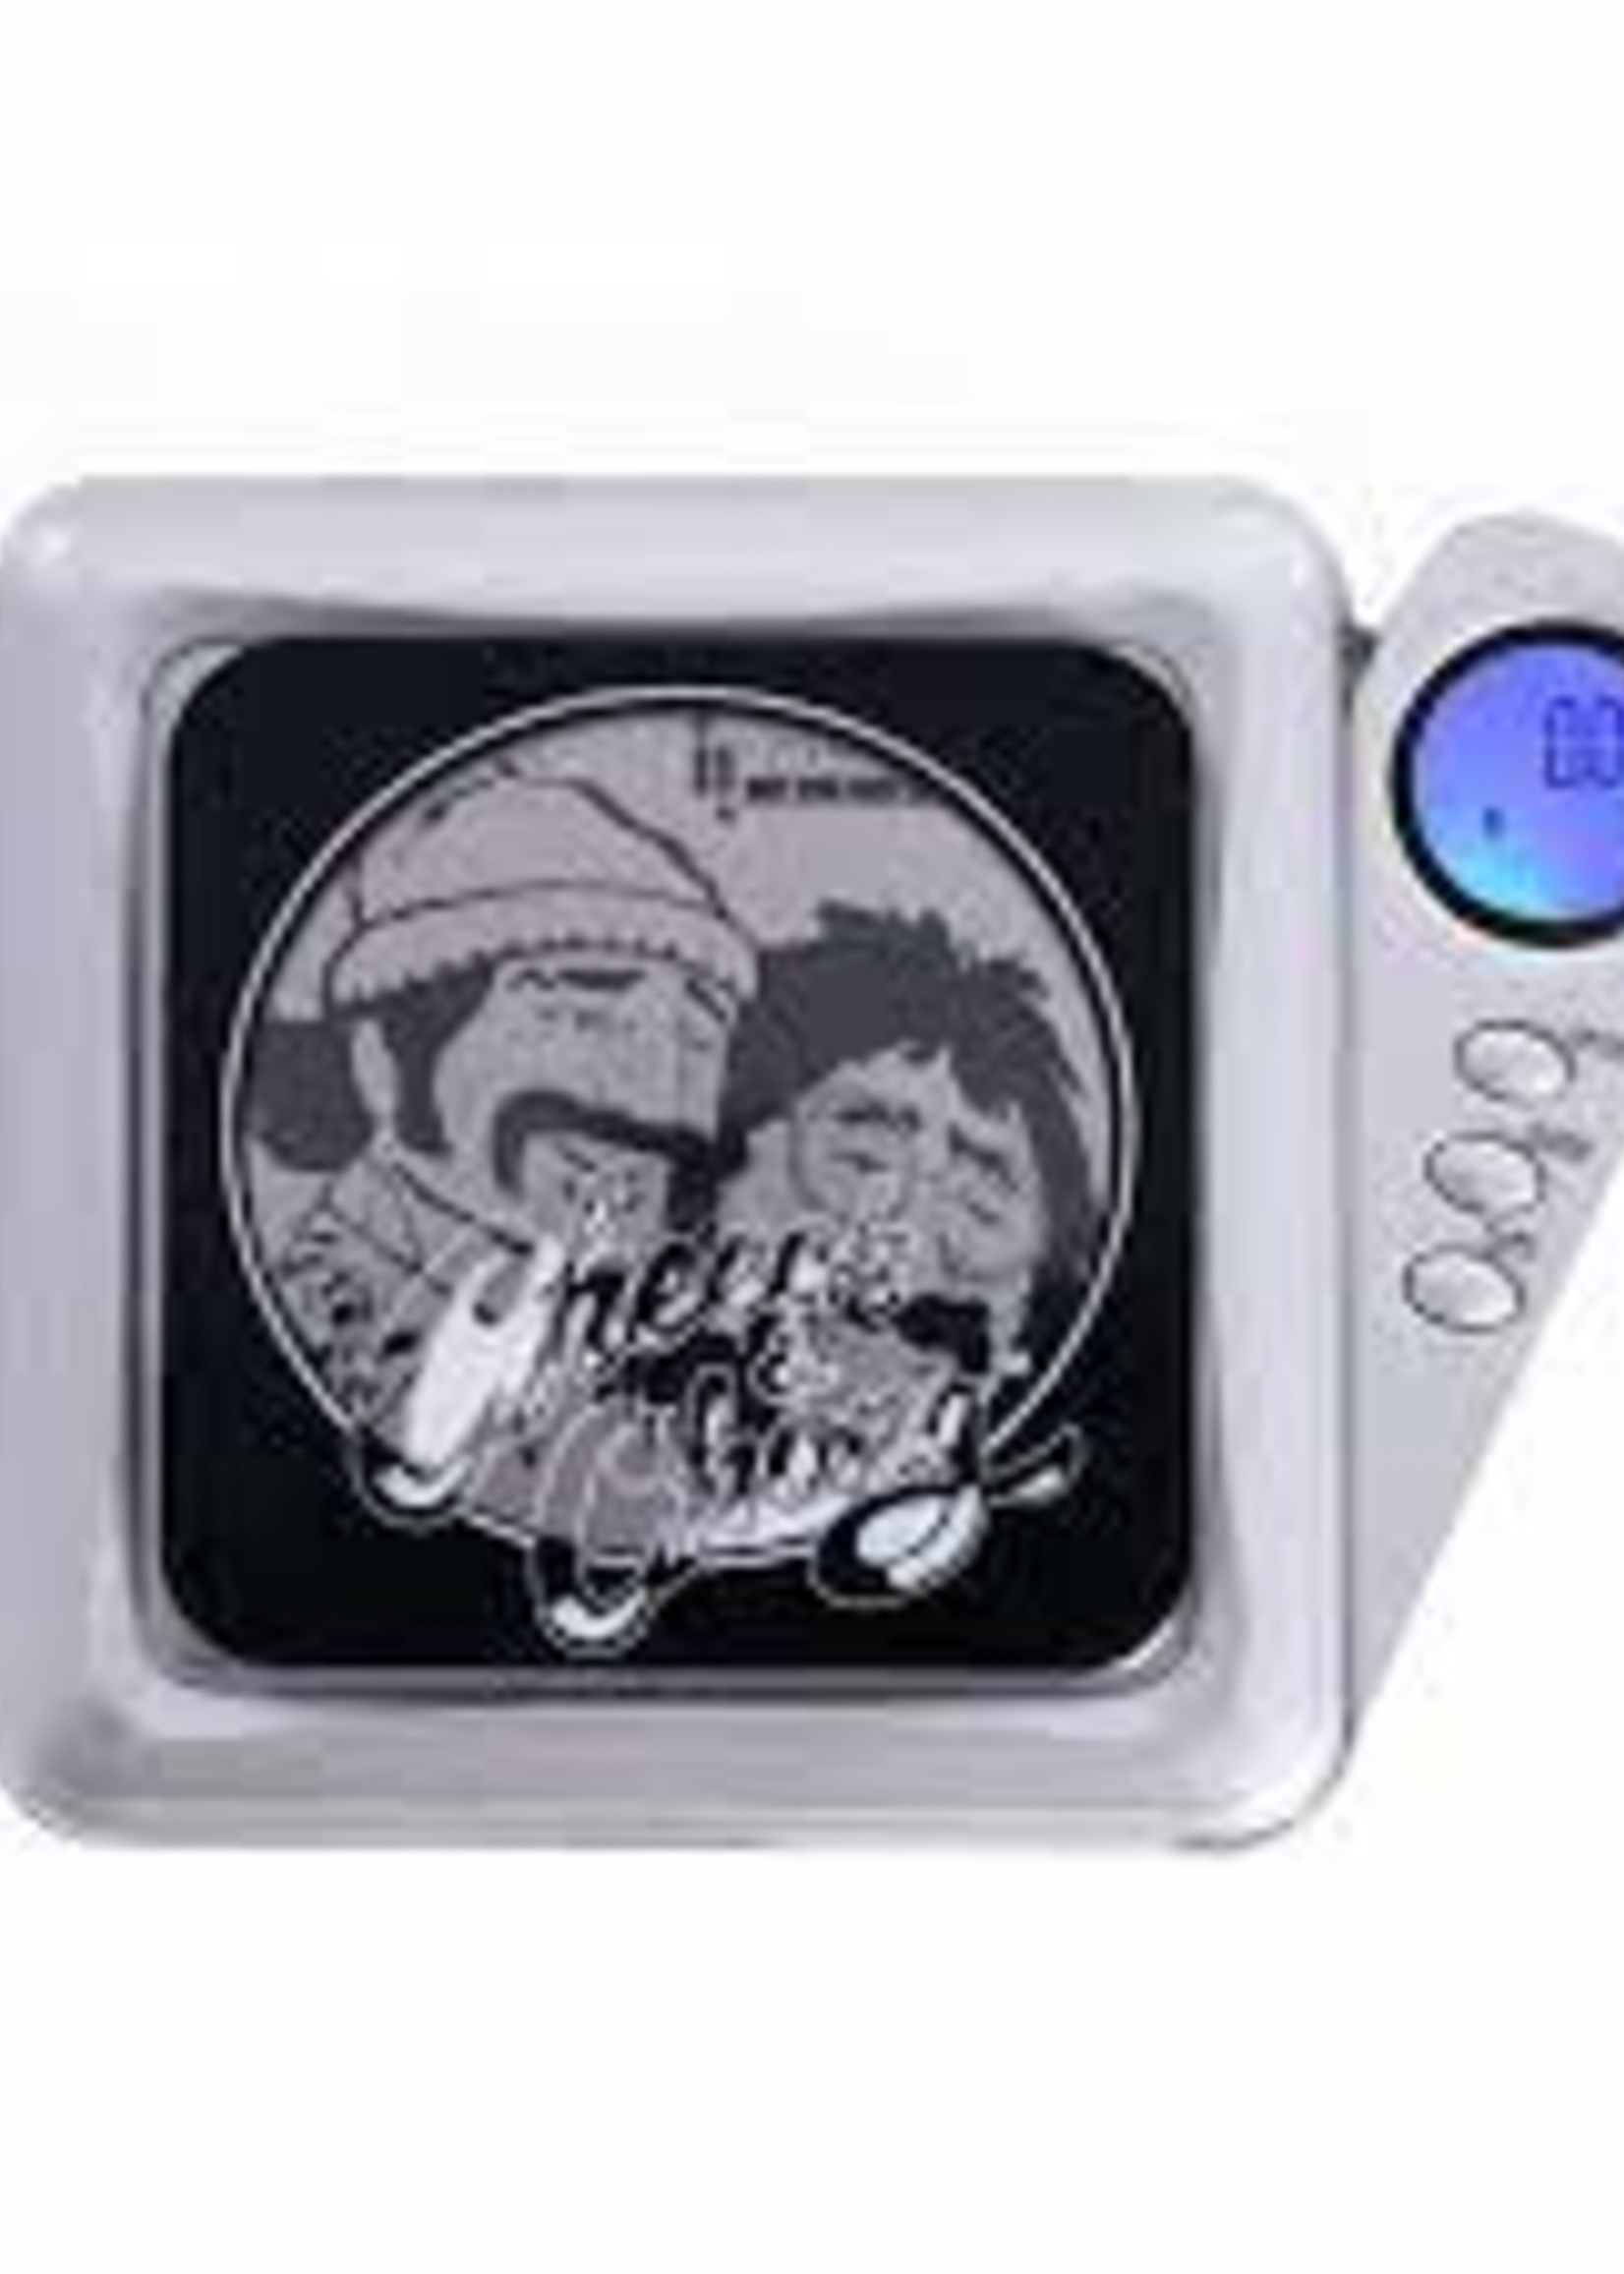 Scales: Cheech and Chong Panther - 50g X 0.01g